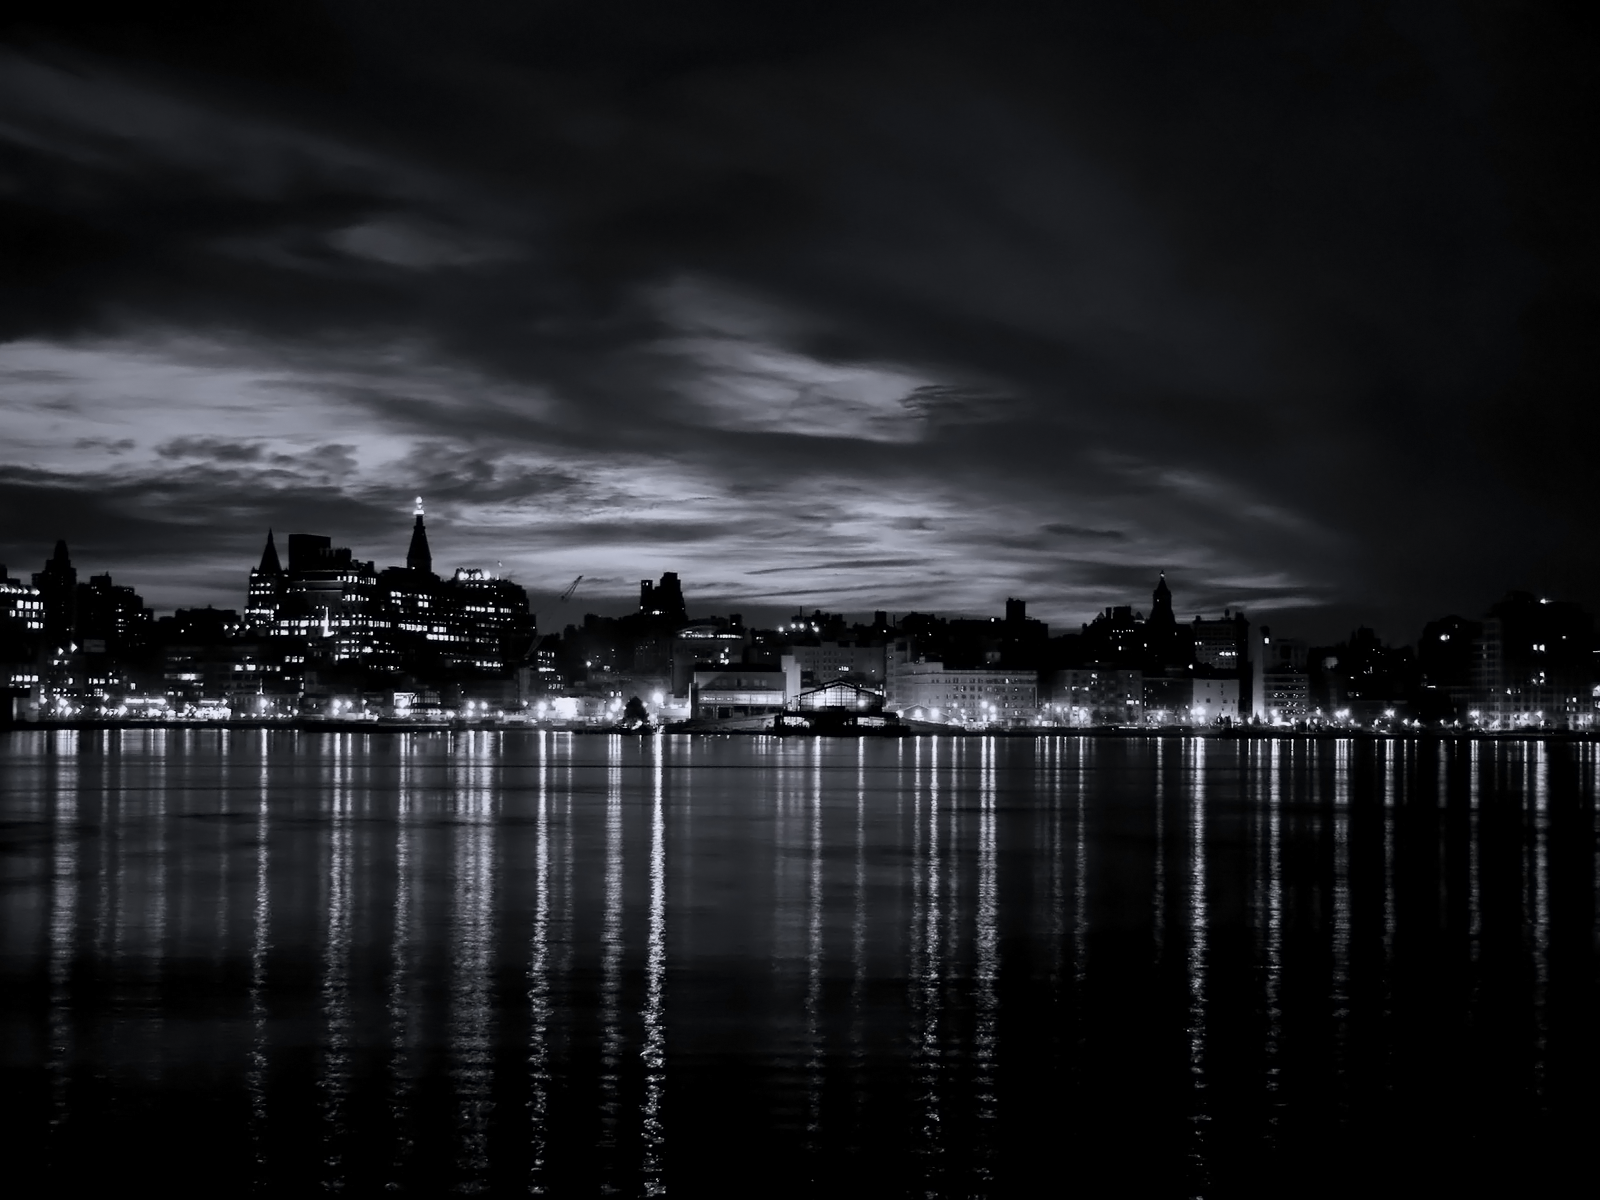  Black  and White  River City Lights  wallpaper  Wheels Down 